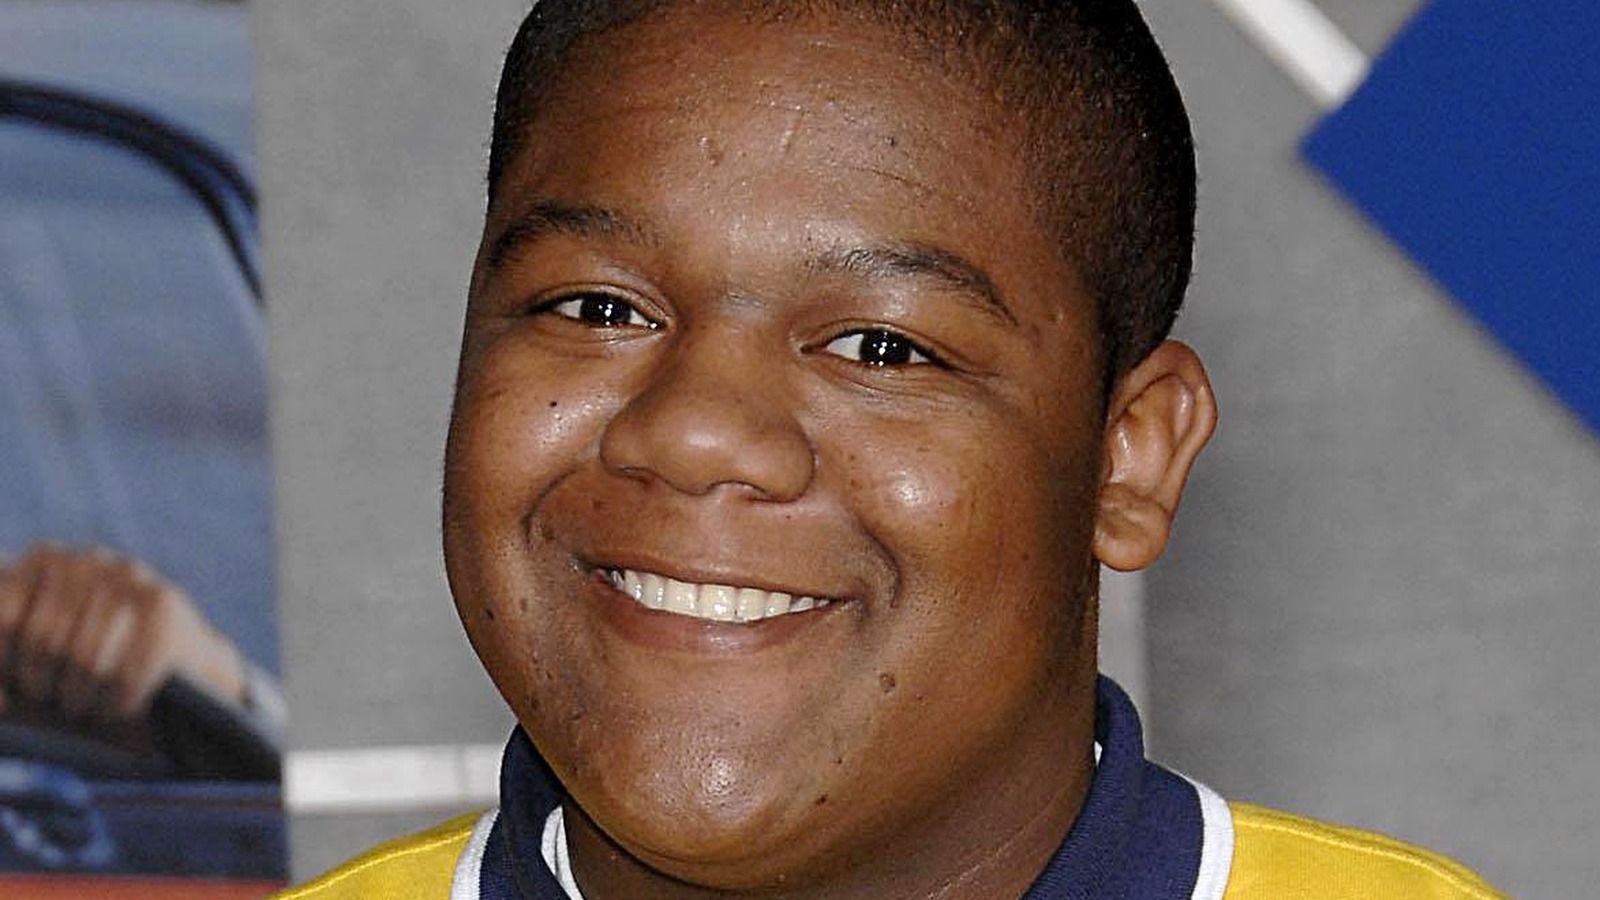 Here's What Kyle Massey Looks Like Today